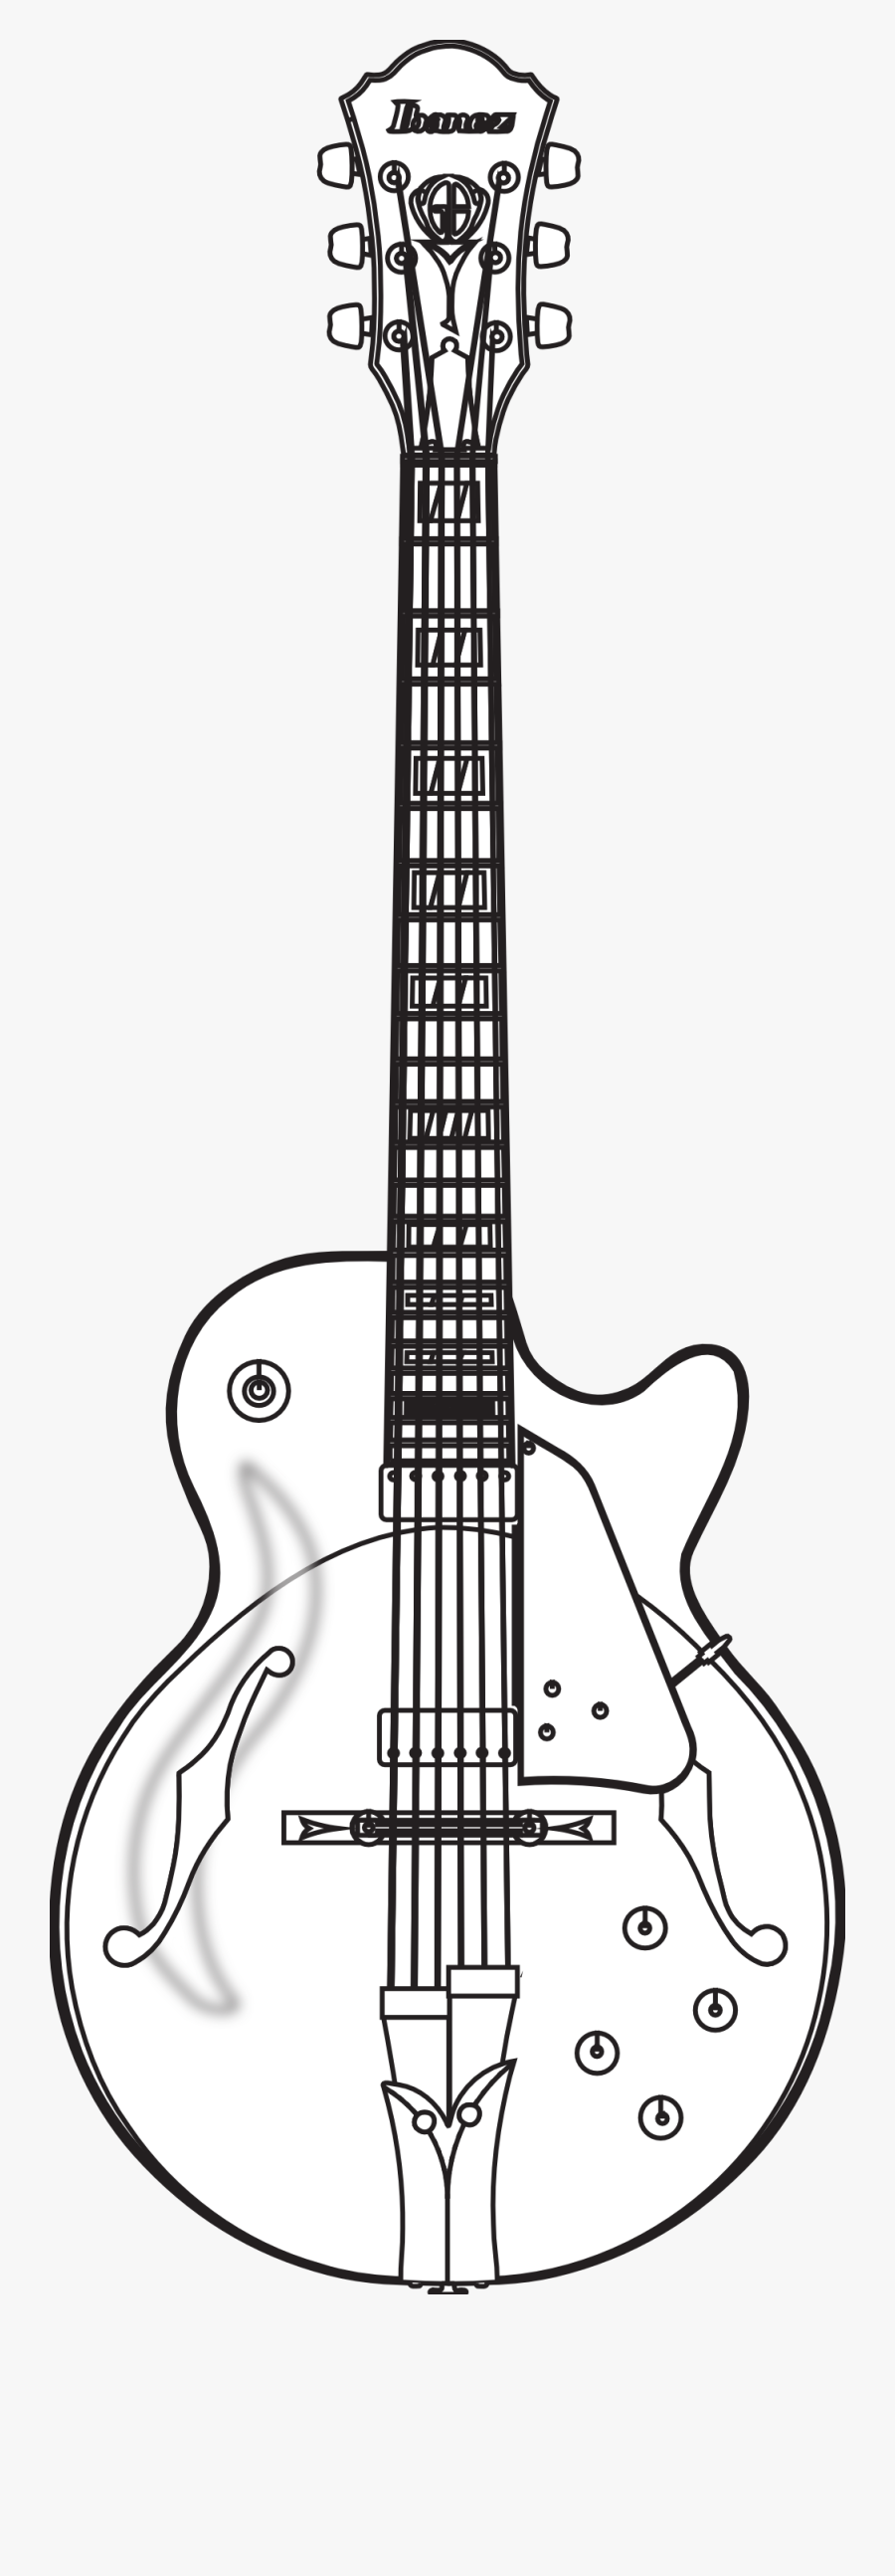 12 String Guitar Drawing, Transparent Clipart